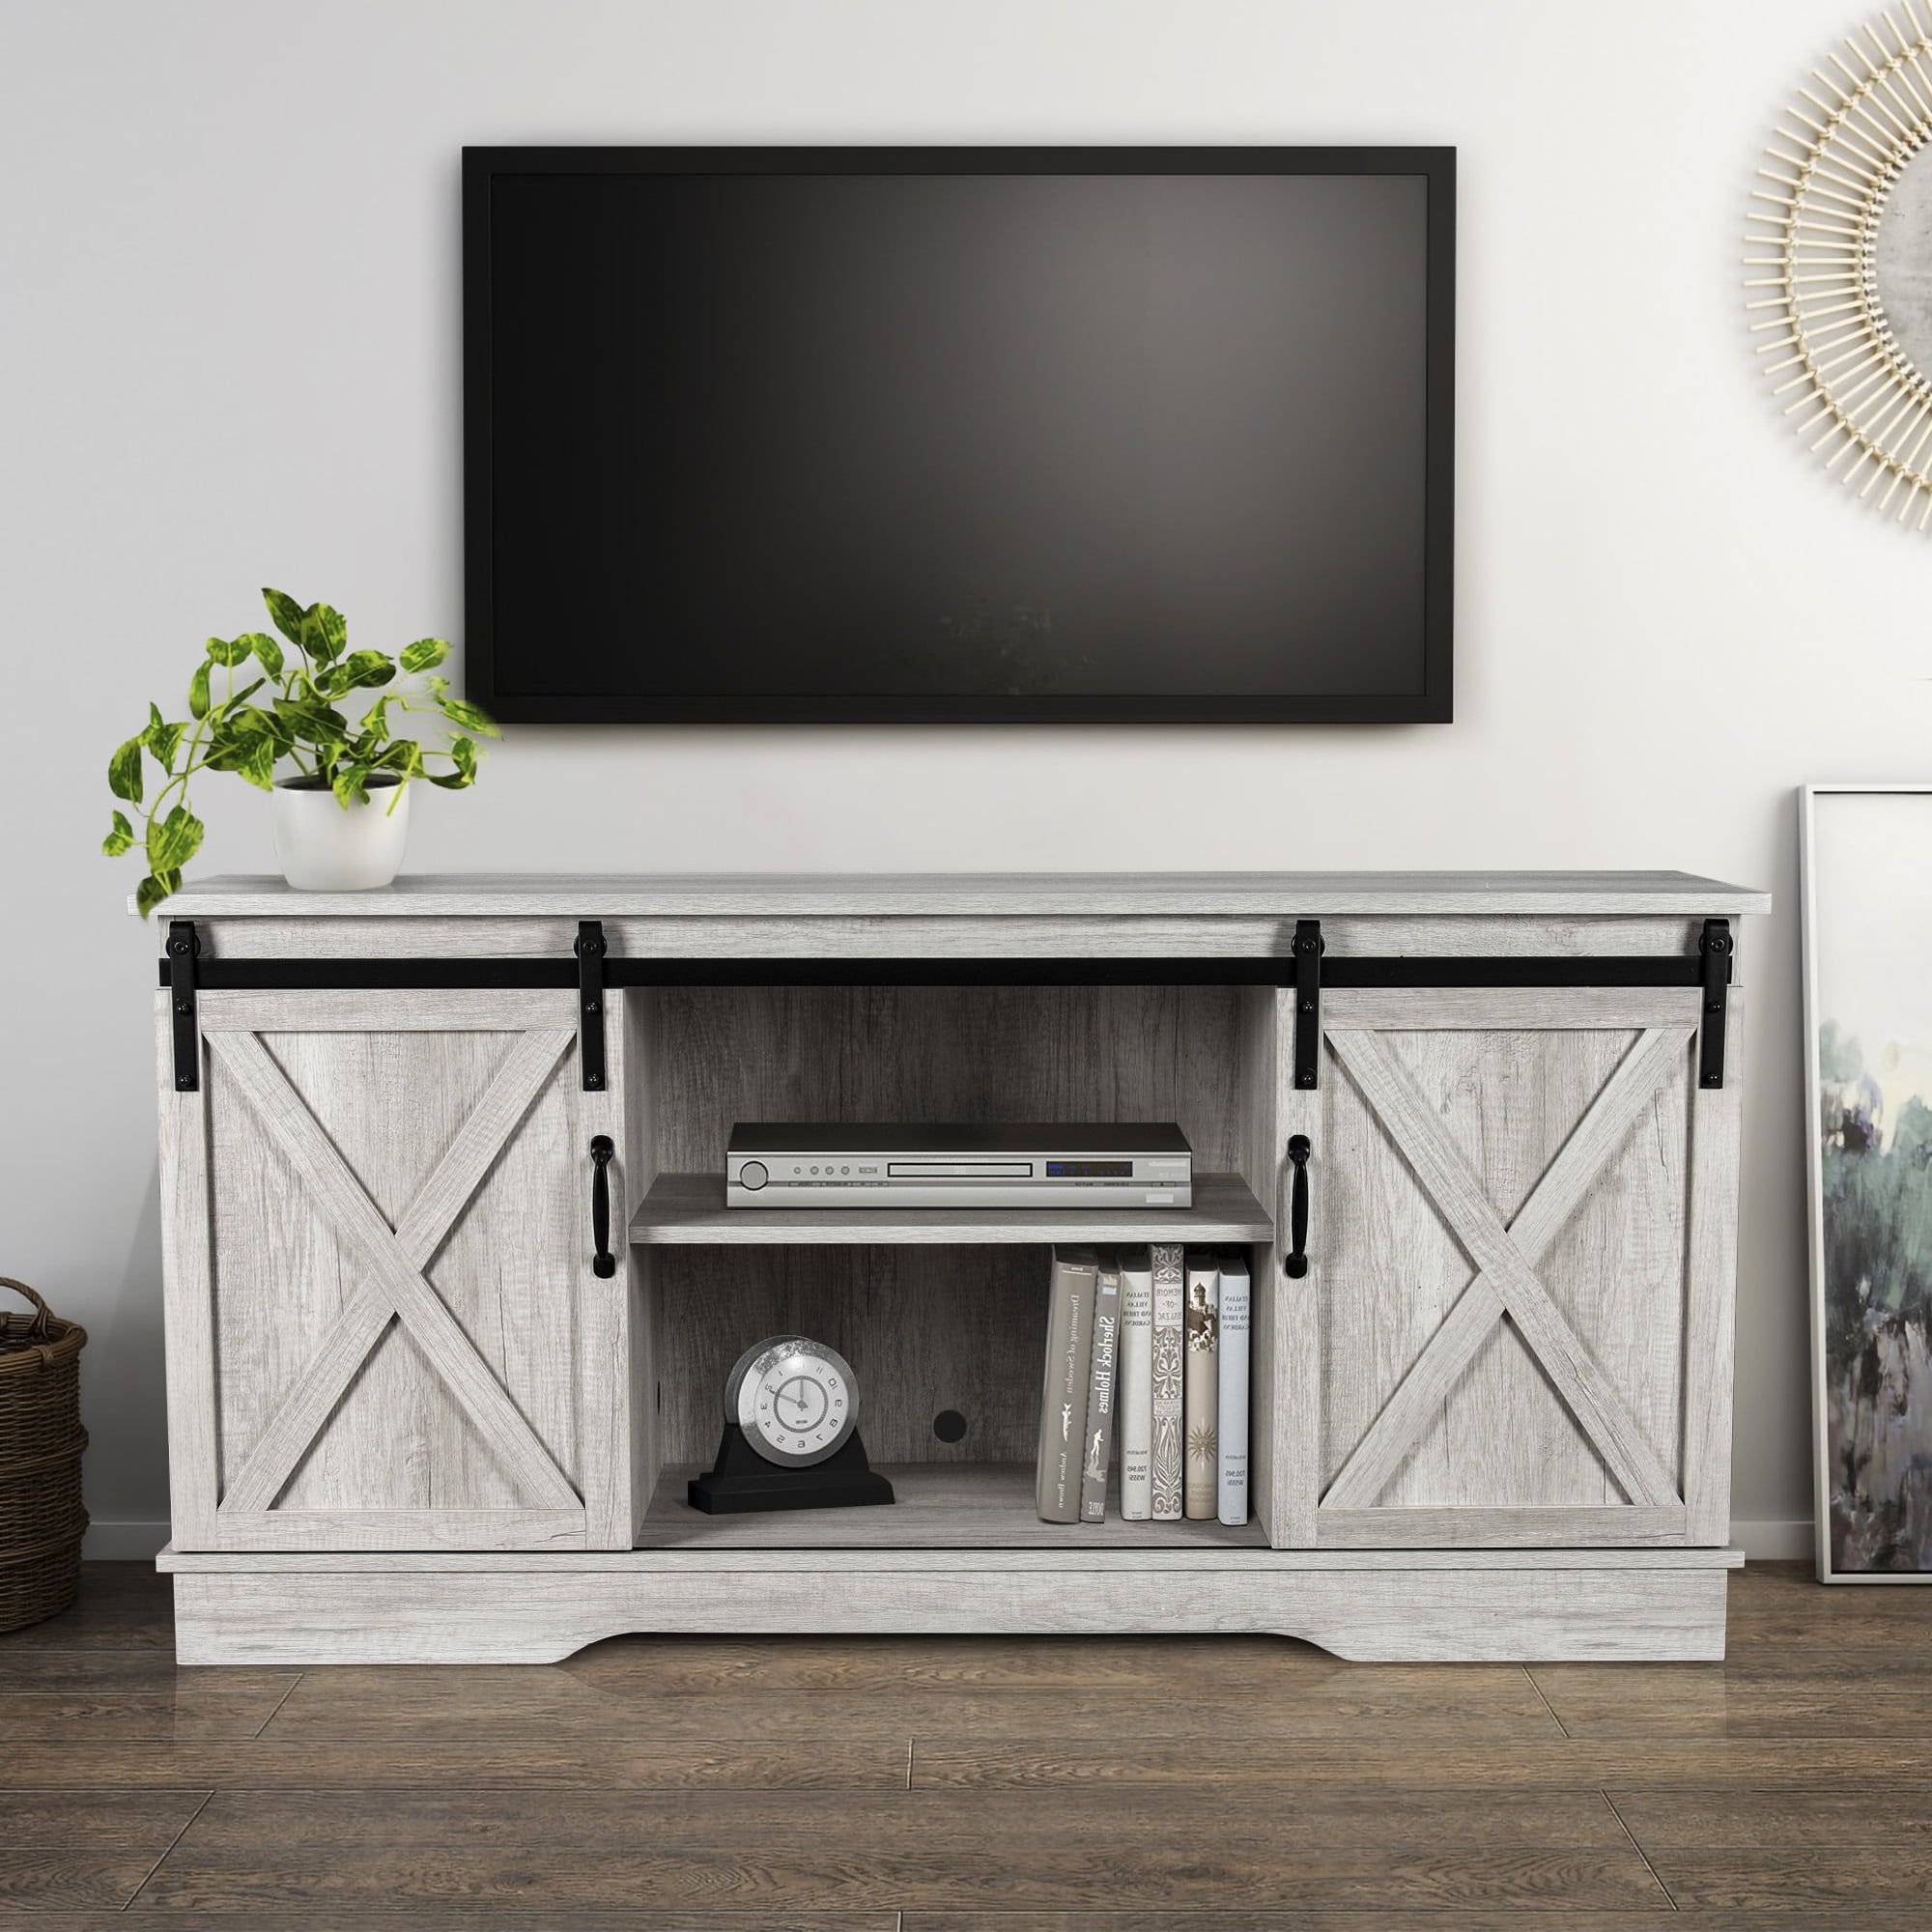 Well Liked Modern Farmhouse Barn Tv Stands With Belleze Modern Farmhouse Style 58 Inch Tv Stand With Sliding Barn Door (View 12 of 15)